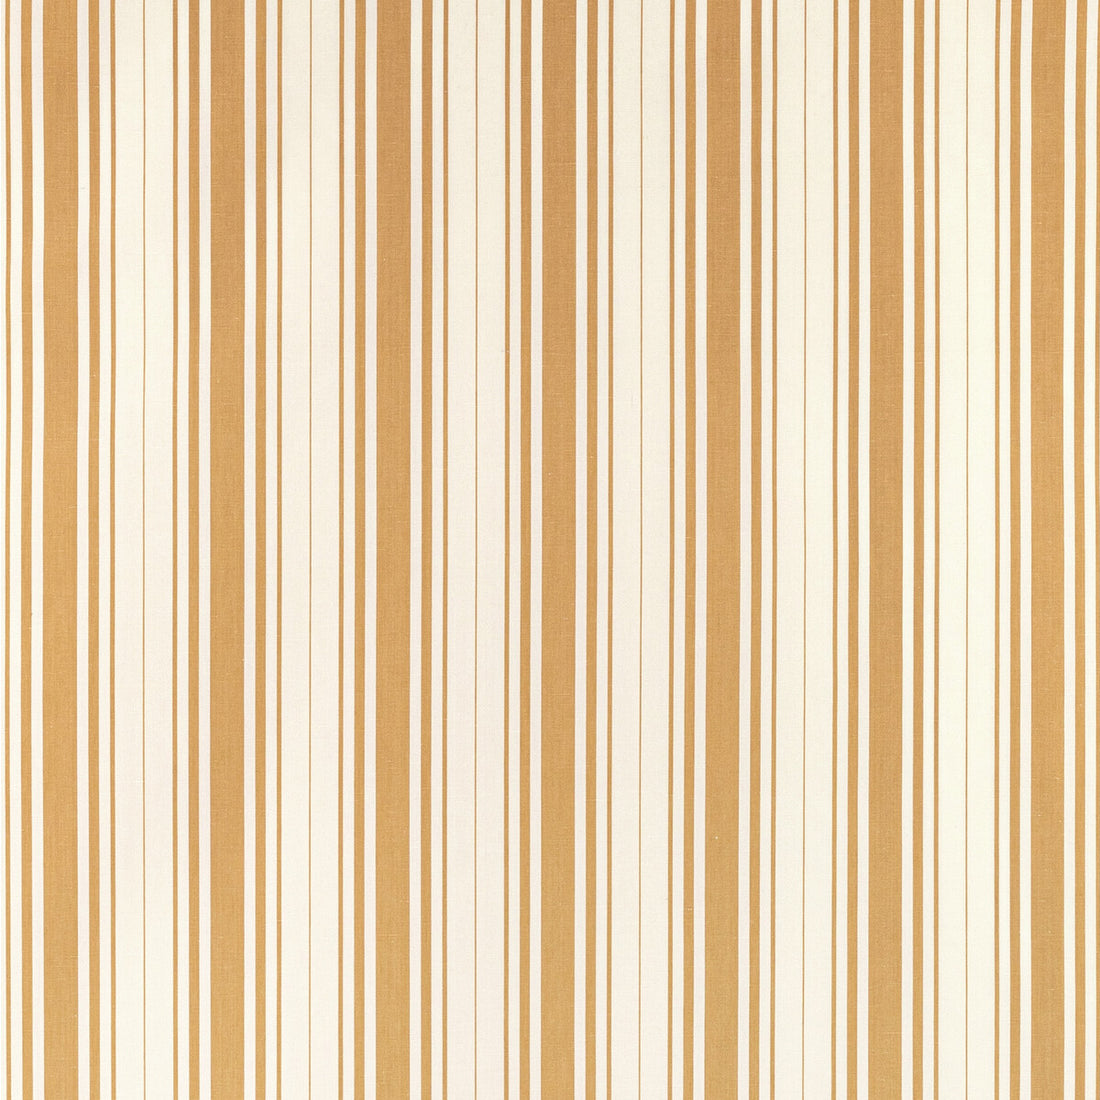 Baldwin Stripe fabric in saffron color - pattern 2022100.4.0 - by Lee Jofa in the Sarah Bartholomew collection